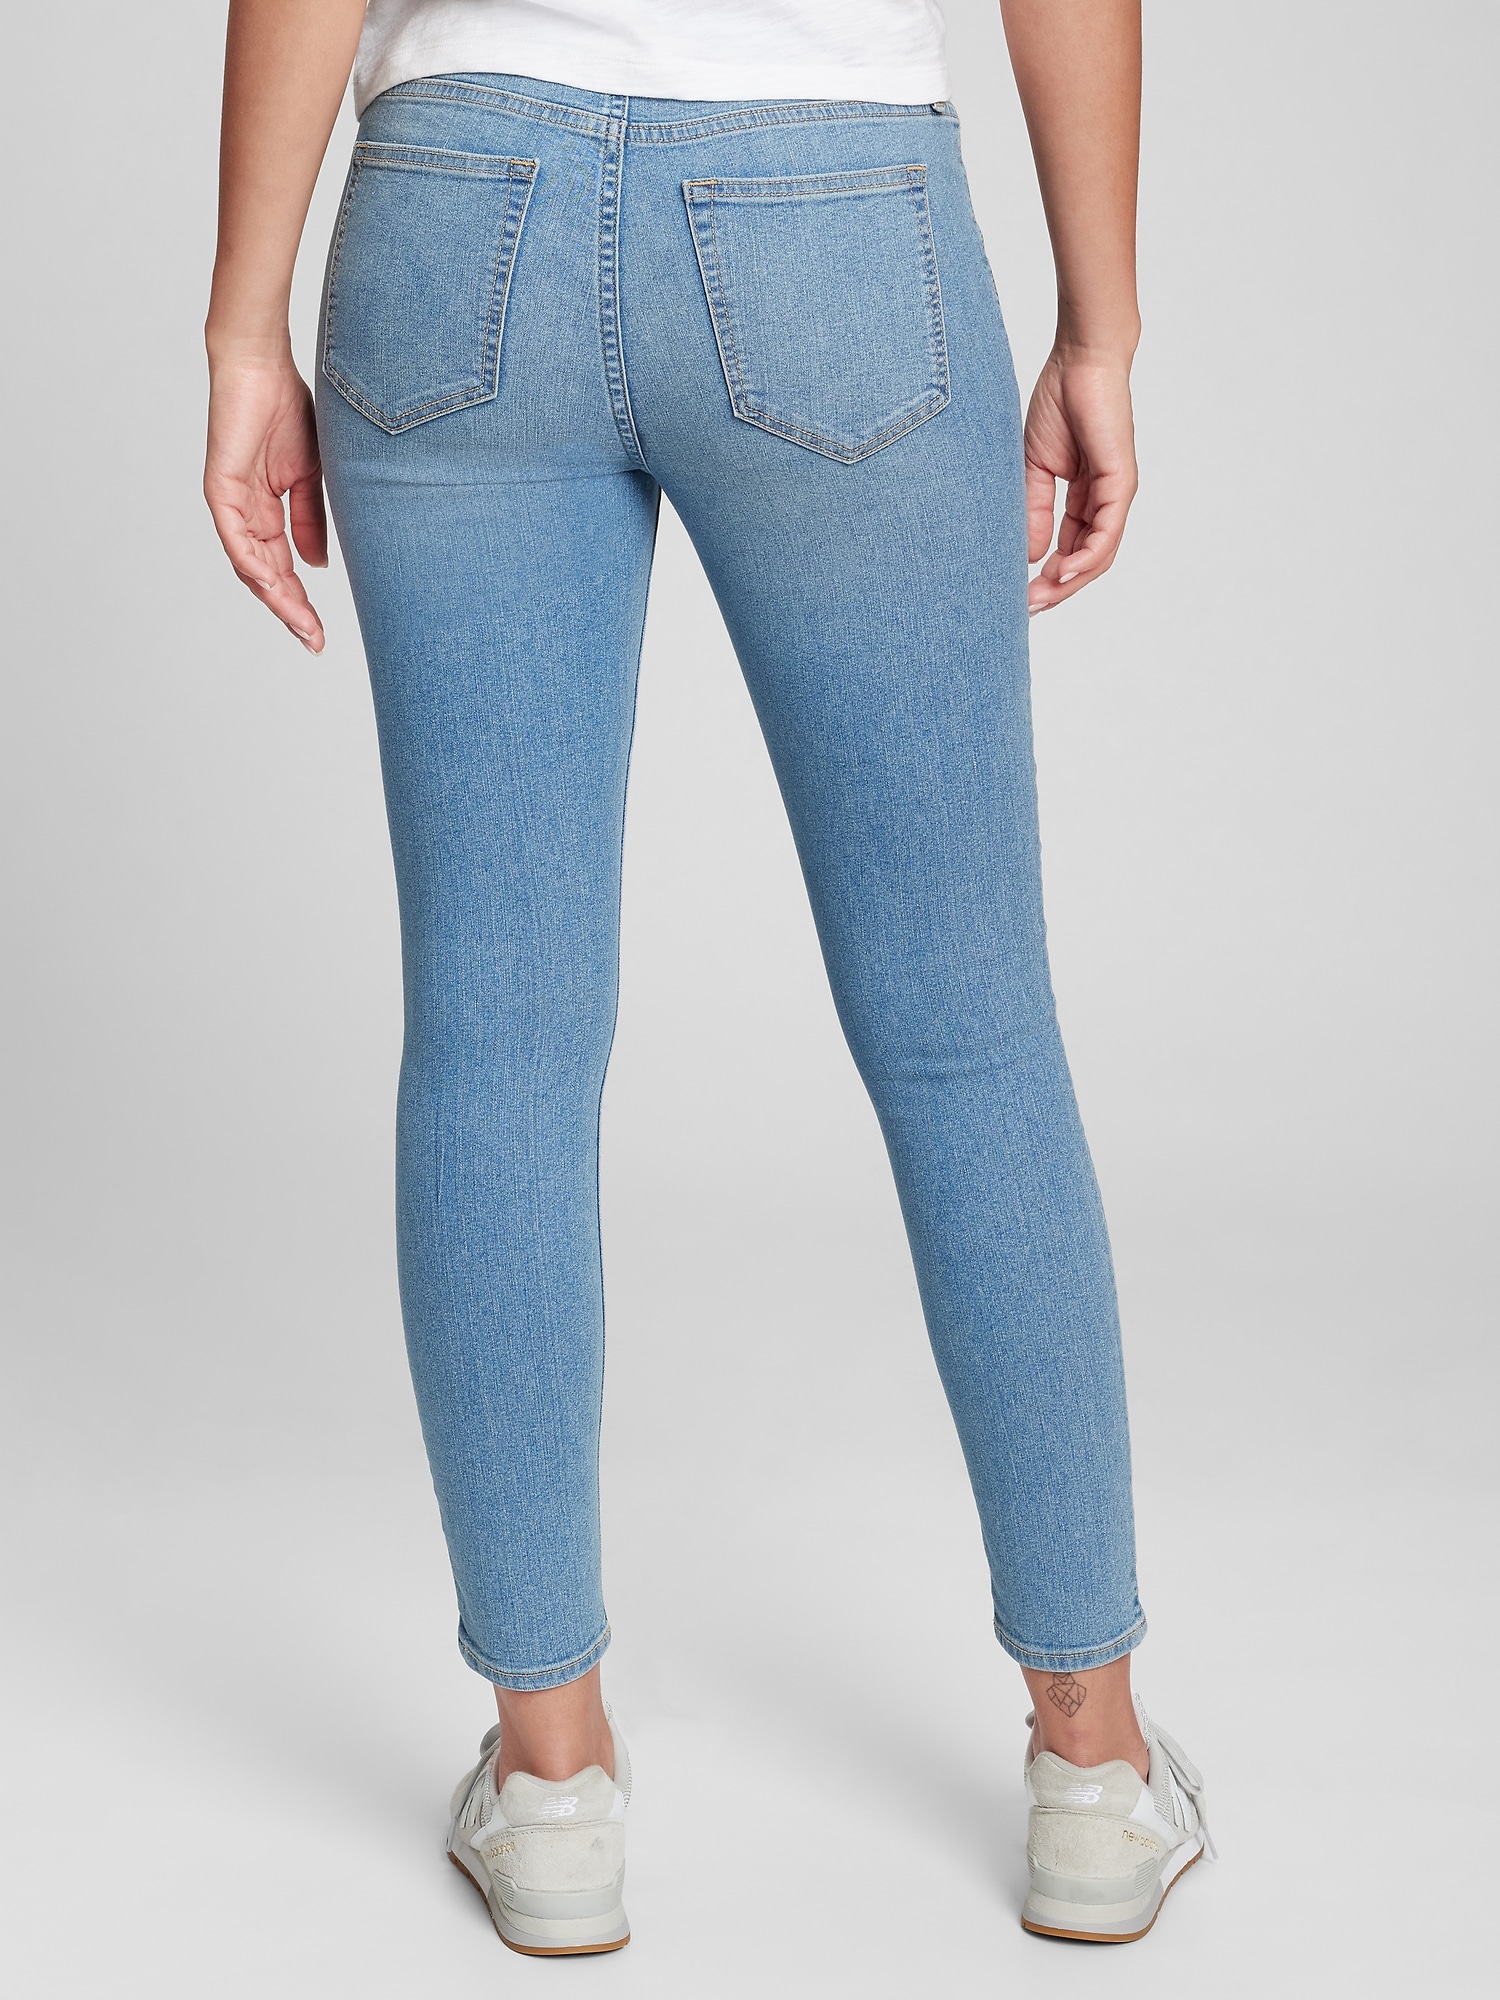 Buy Women Perfect Blue Mid Rise Jeggings online